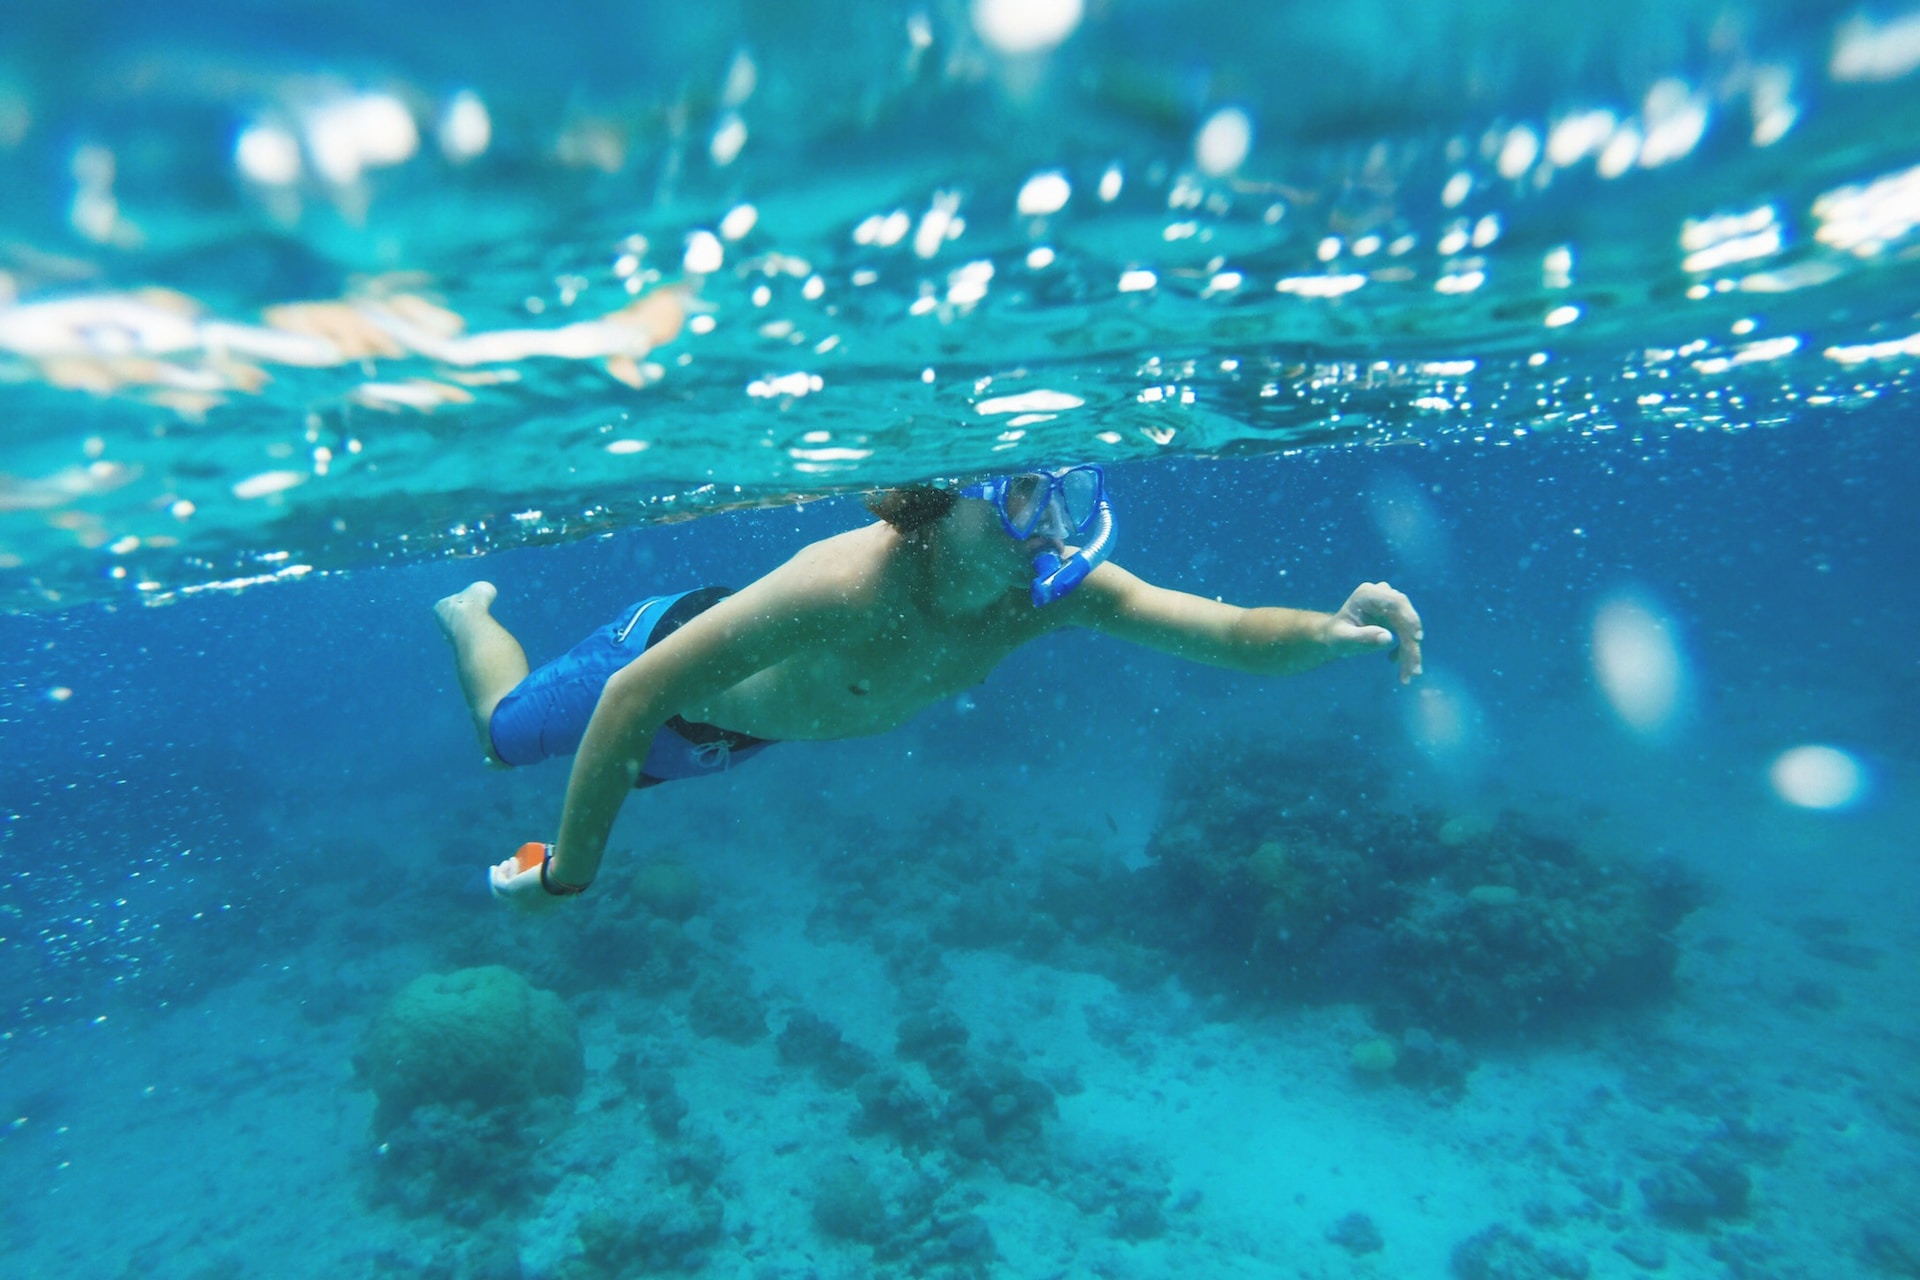 person snorkeling in the ocean